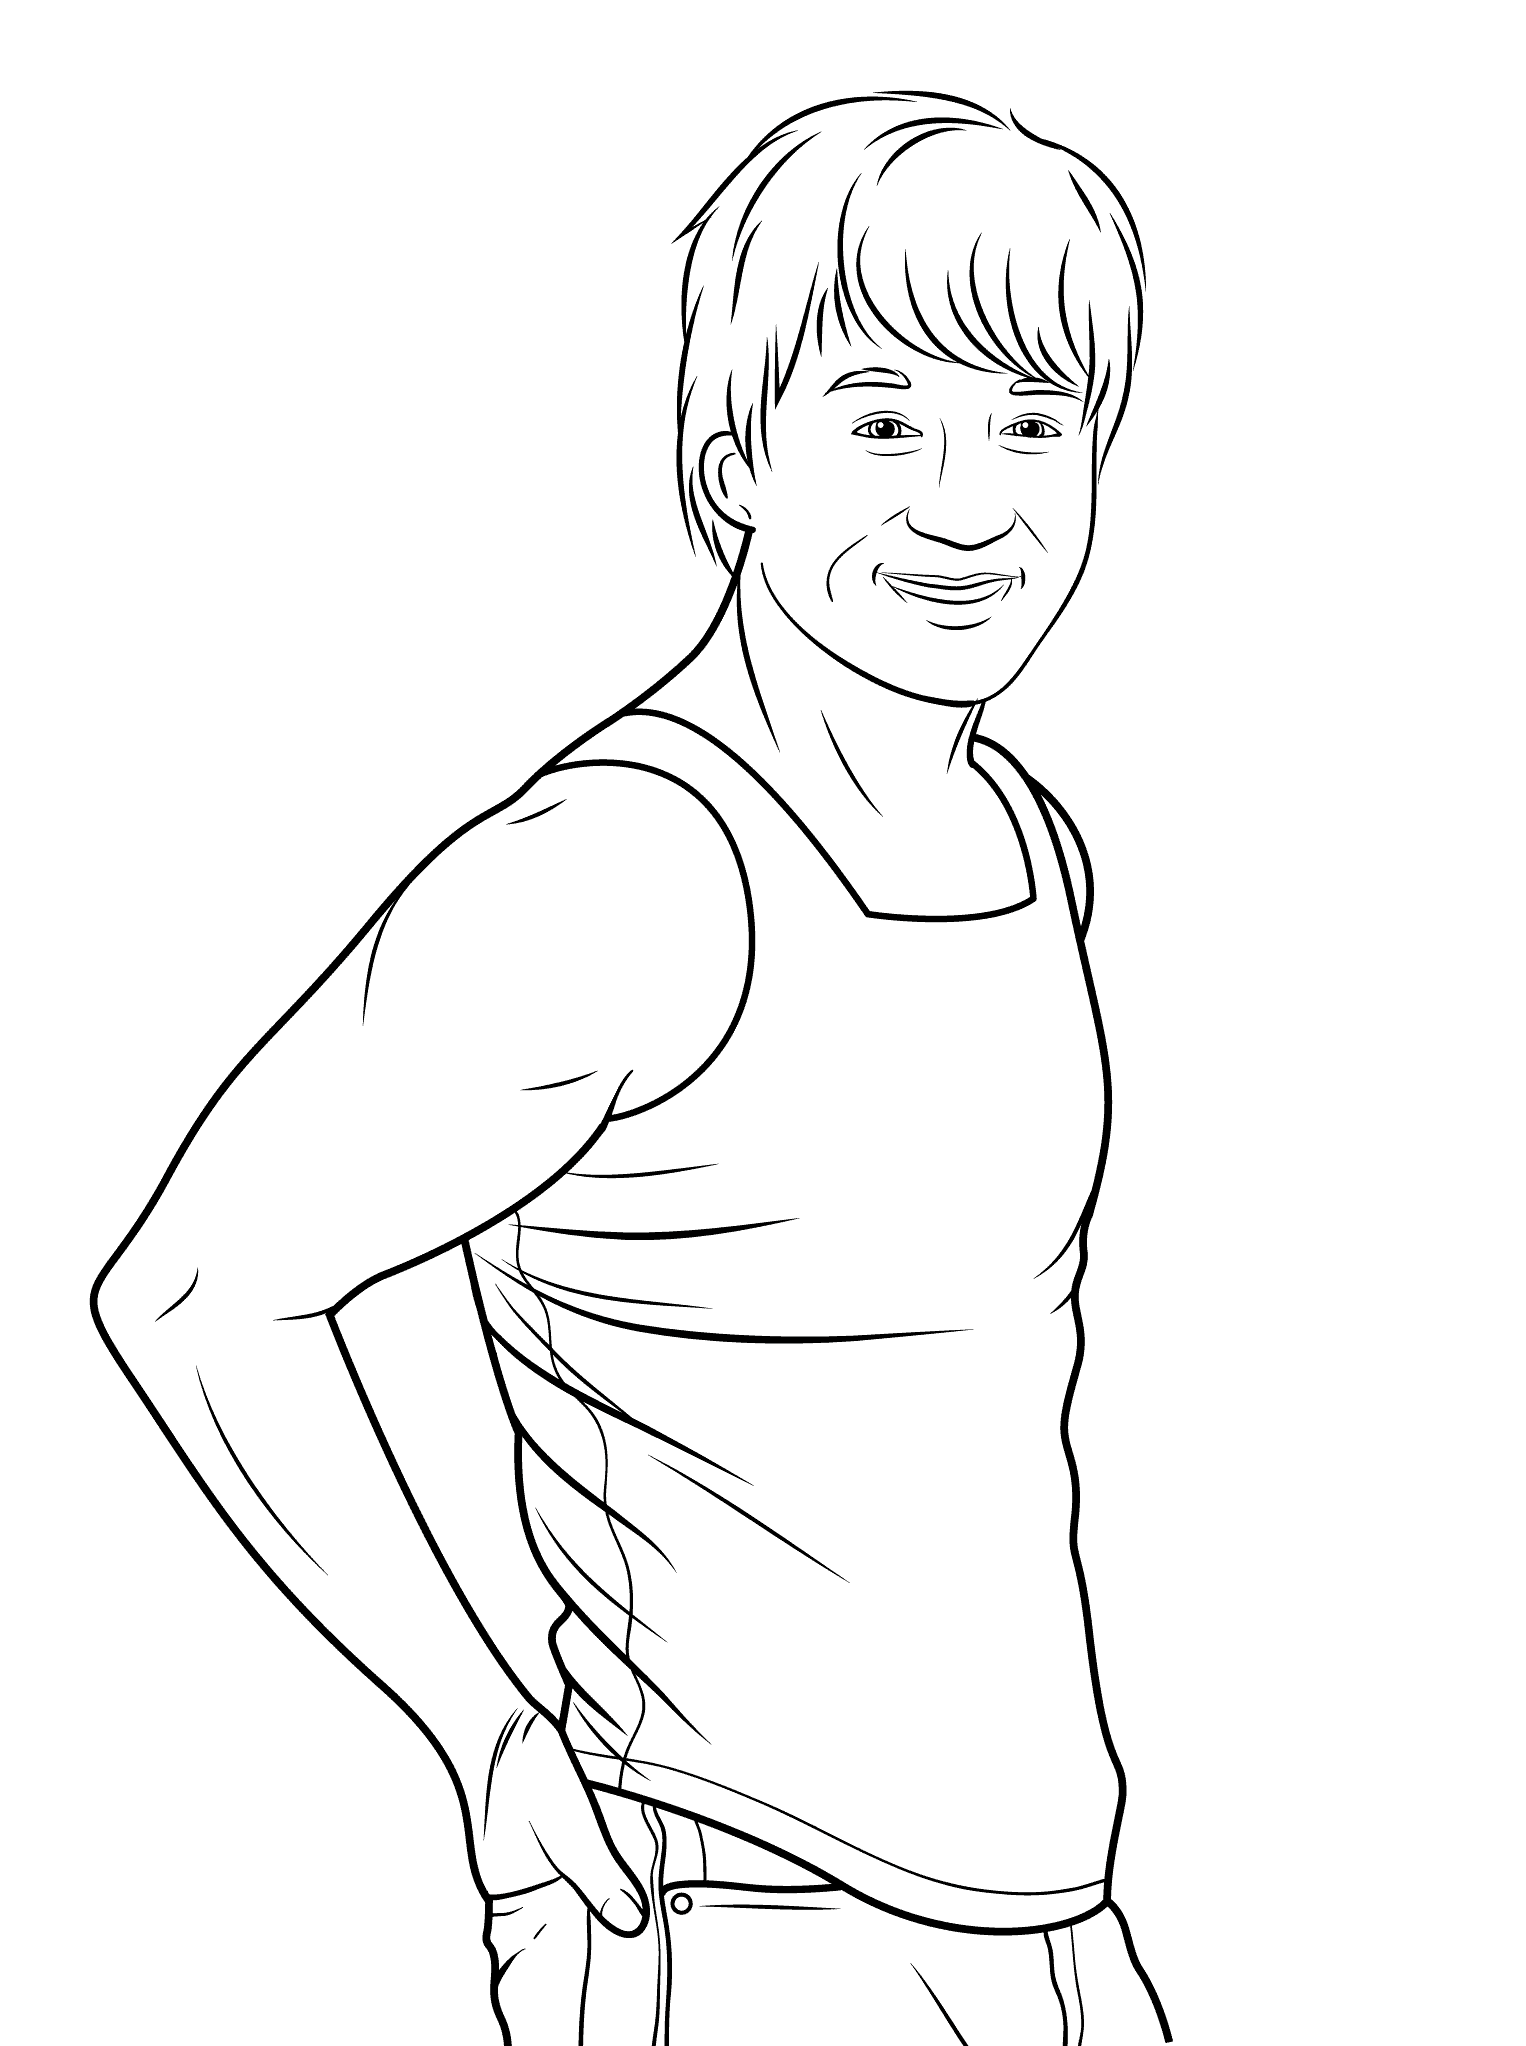 Jackie Chan Celebrity Coloring Page